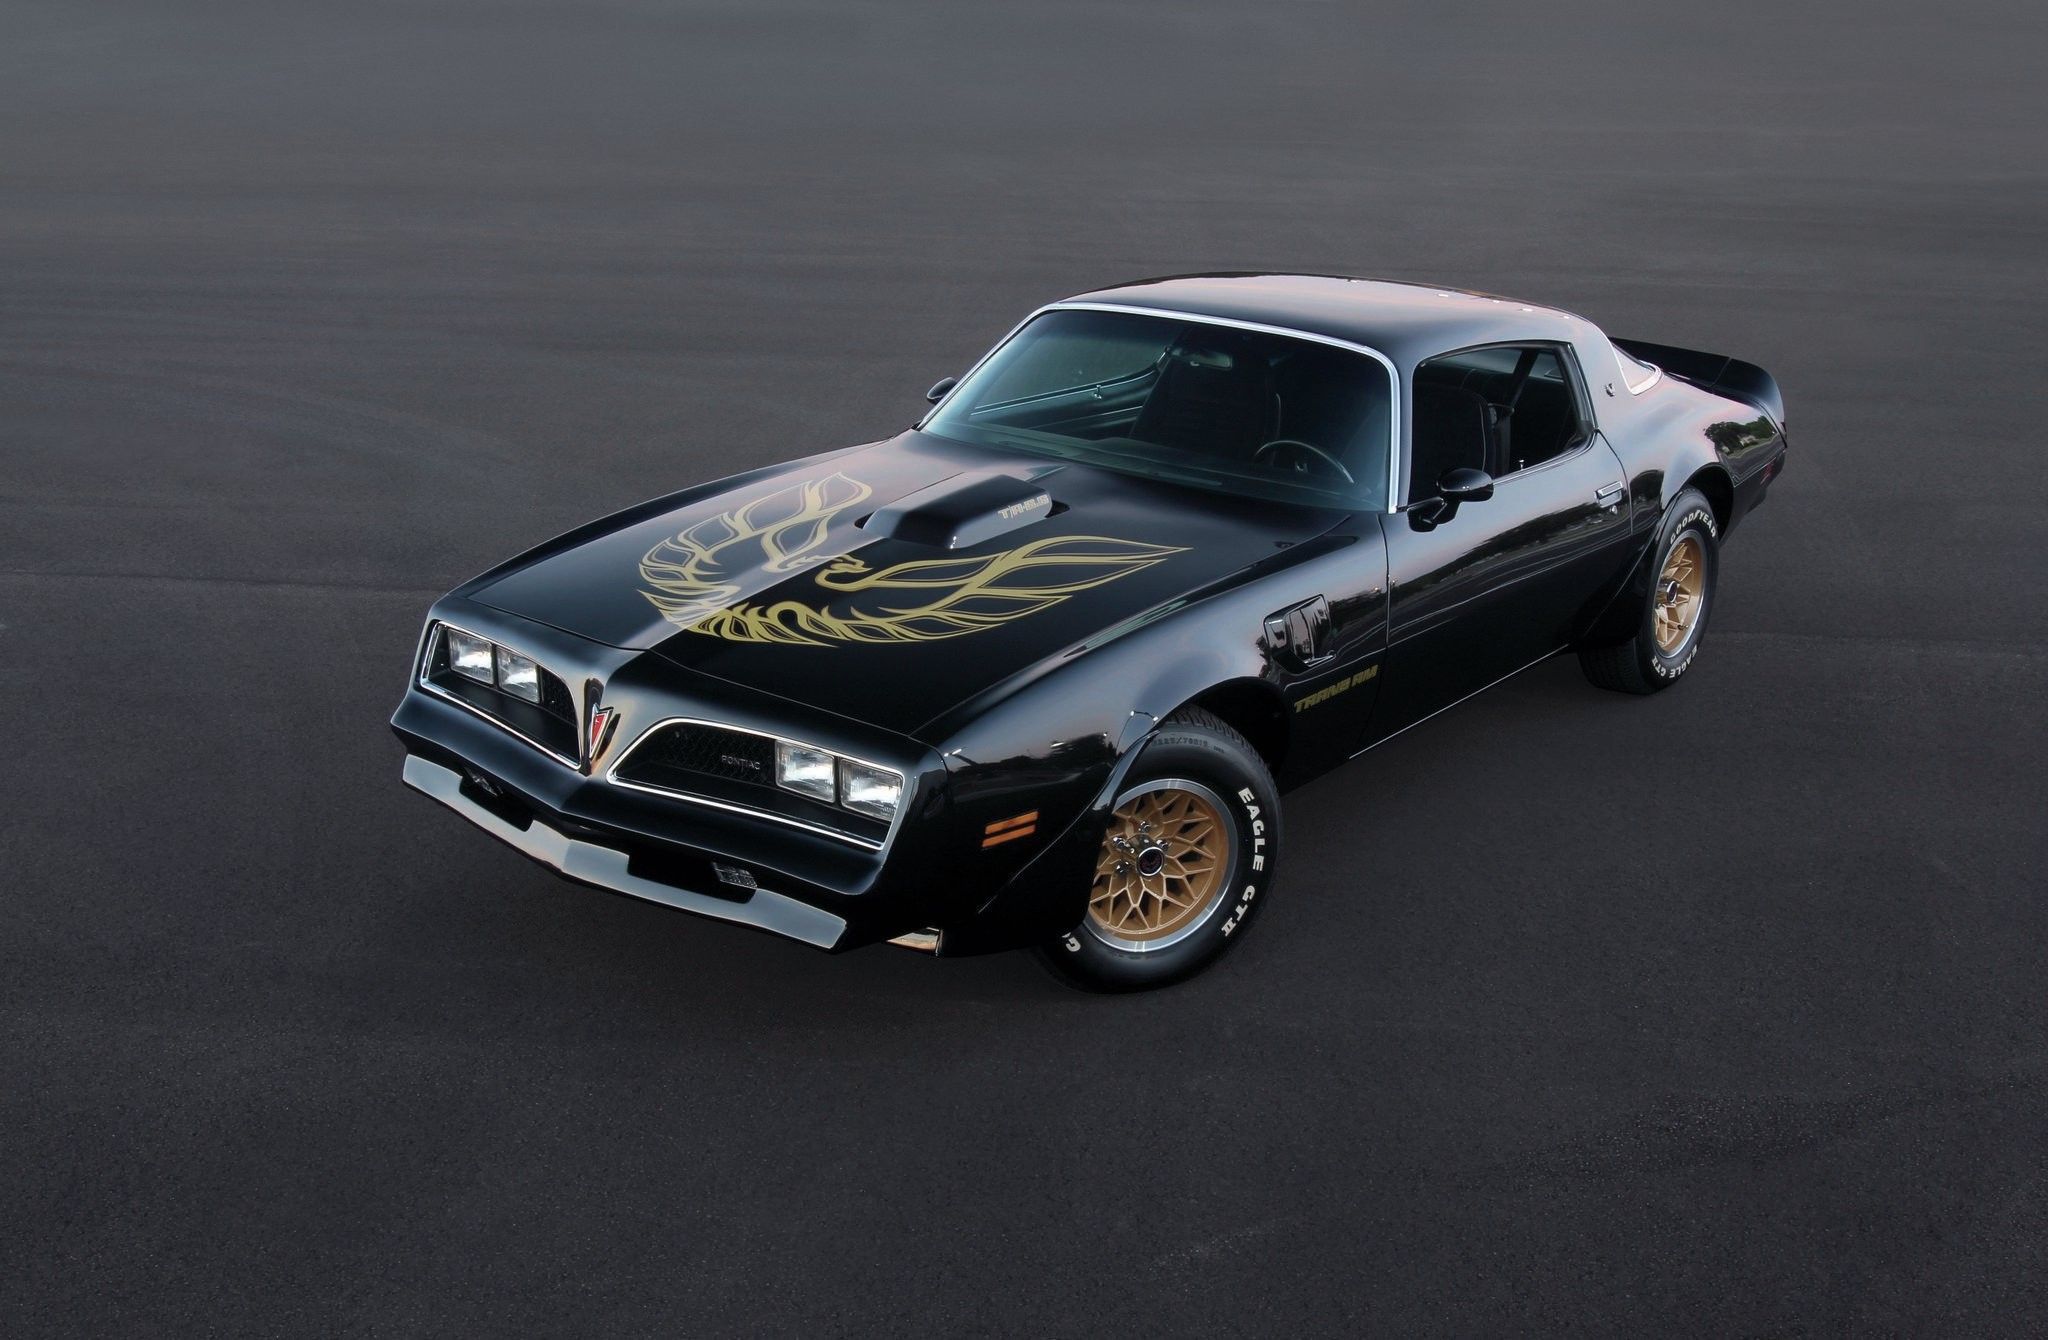 Smokey And The Bandit HD Wallpapers and Backgrounds